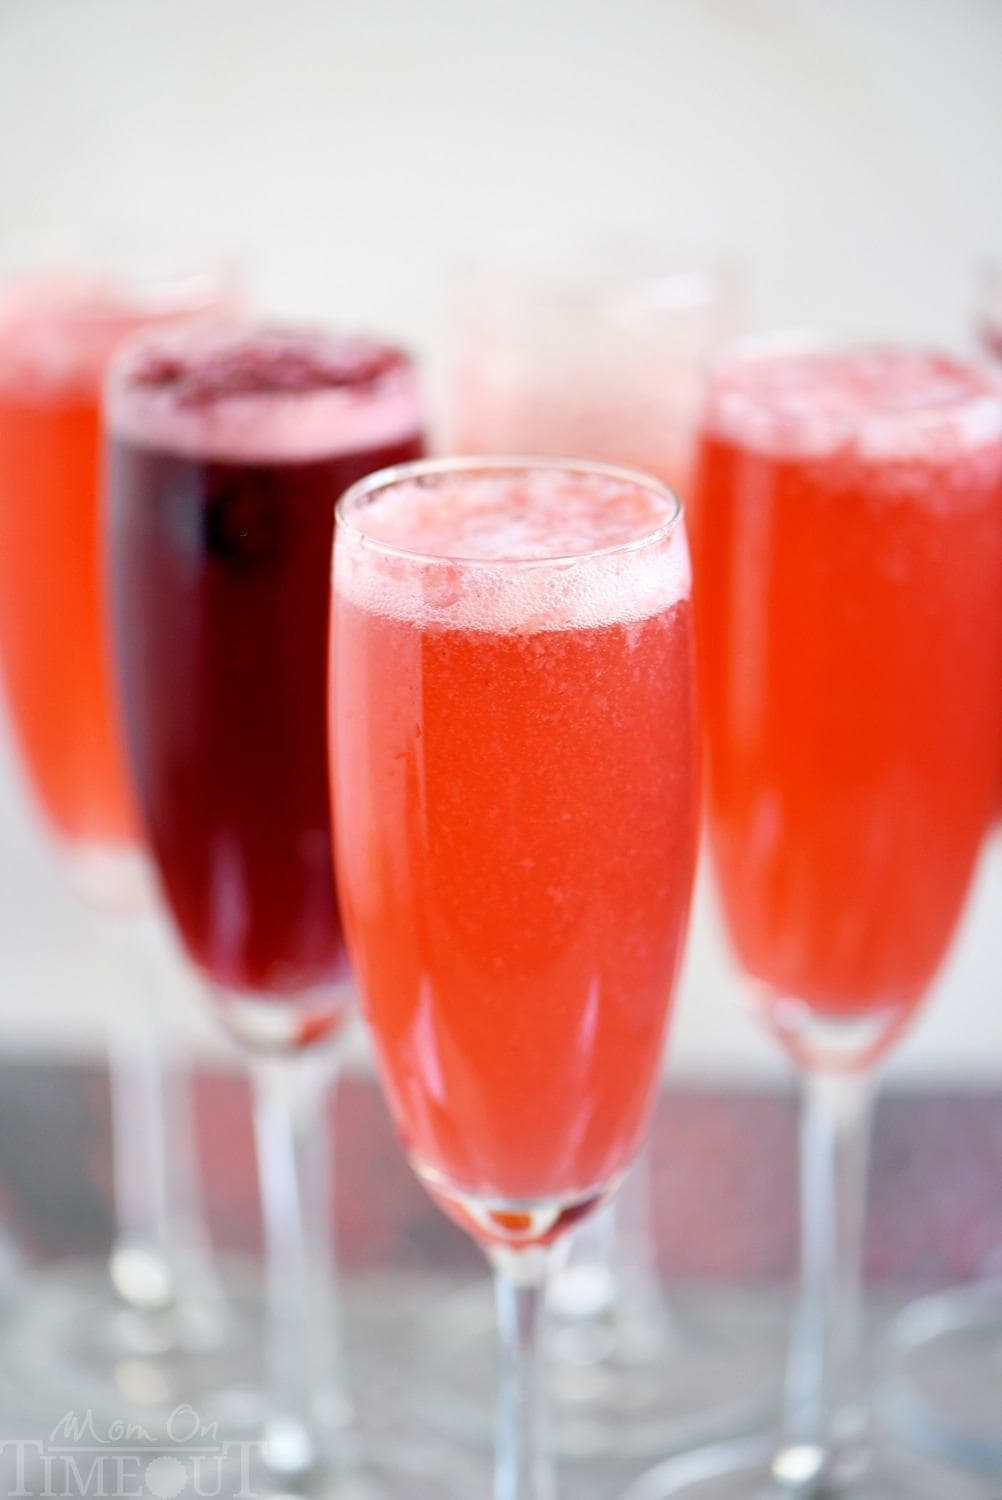 This Berry Champagne Punch is the perfect way to kick off New Year's Eve! This punch is super easy to prepare and is made with fresh berries and champagne or sparkling wine. Perfect for Easter brunch and Mother's Day too! // Mom On Timeout